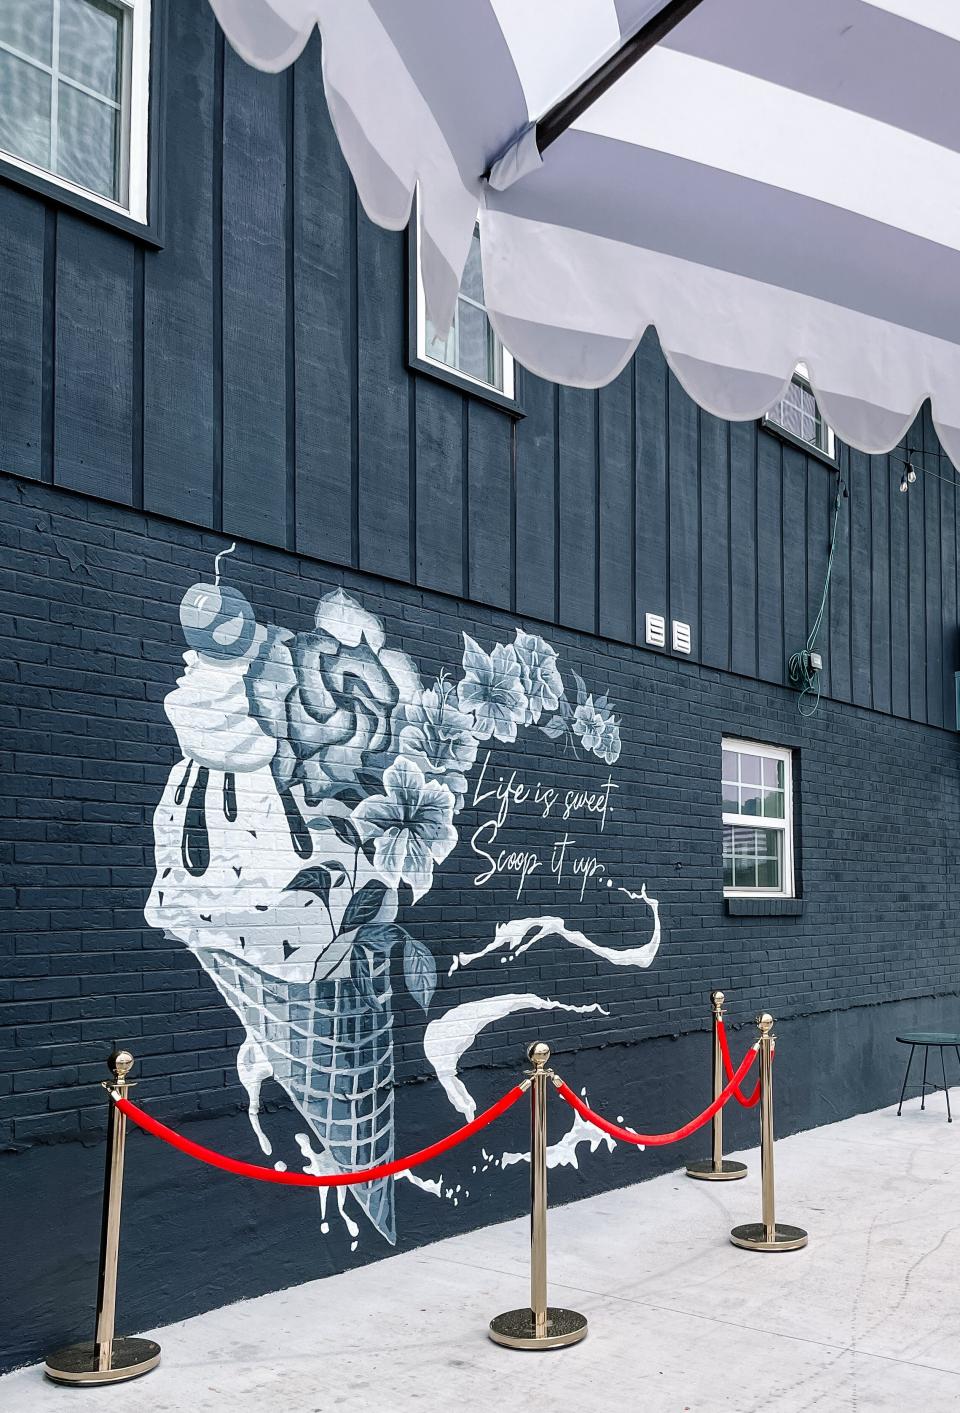 Muralist Mara Wilson painted this mural in front of customers as part of The Sugar Queen Creamery first birthday celebration. South Knoxville, June 29, 2023.